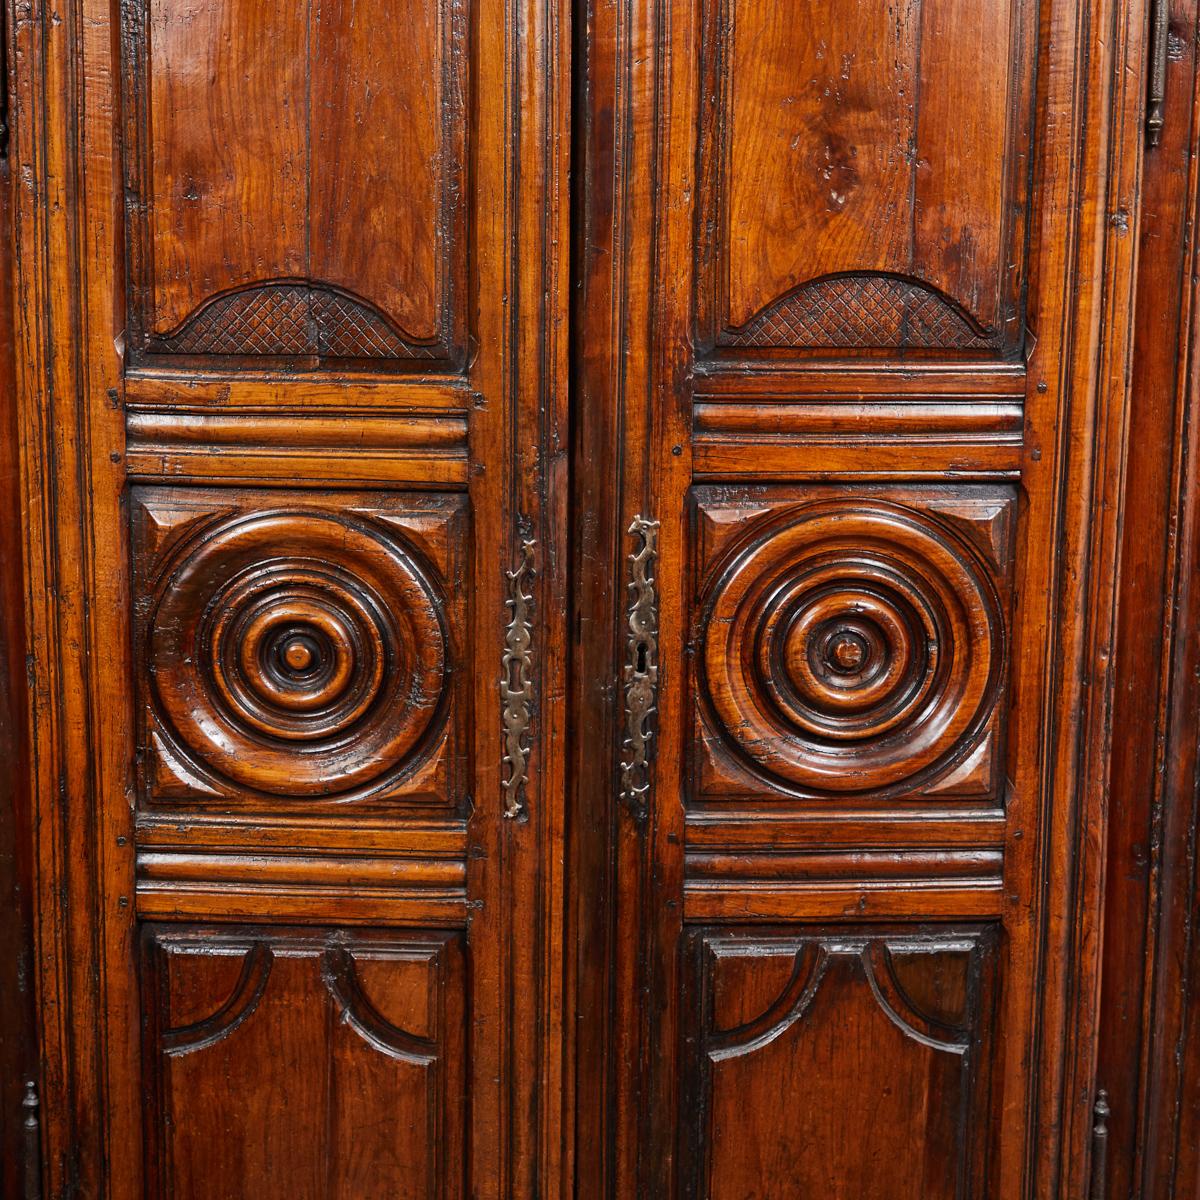 Late 18th century French carved cherrywood armoire. Country armoire with carved panels, roundels, iron hardware, and square feet. Great for storage or as a storage cupboard, comes with lock and key.